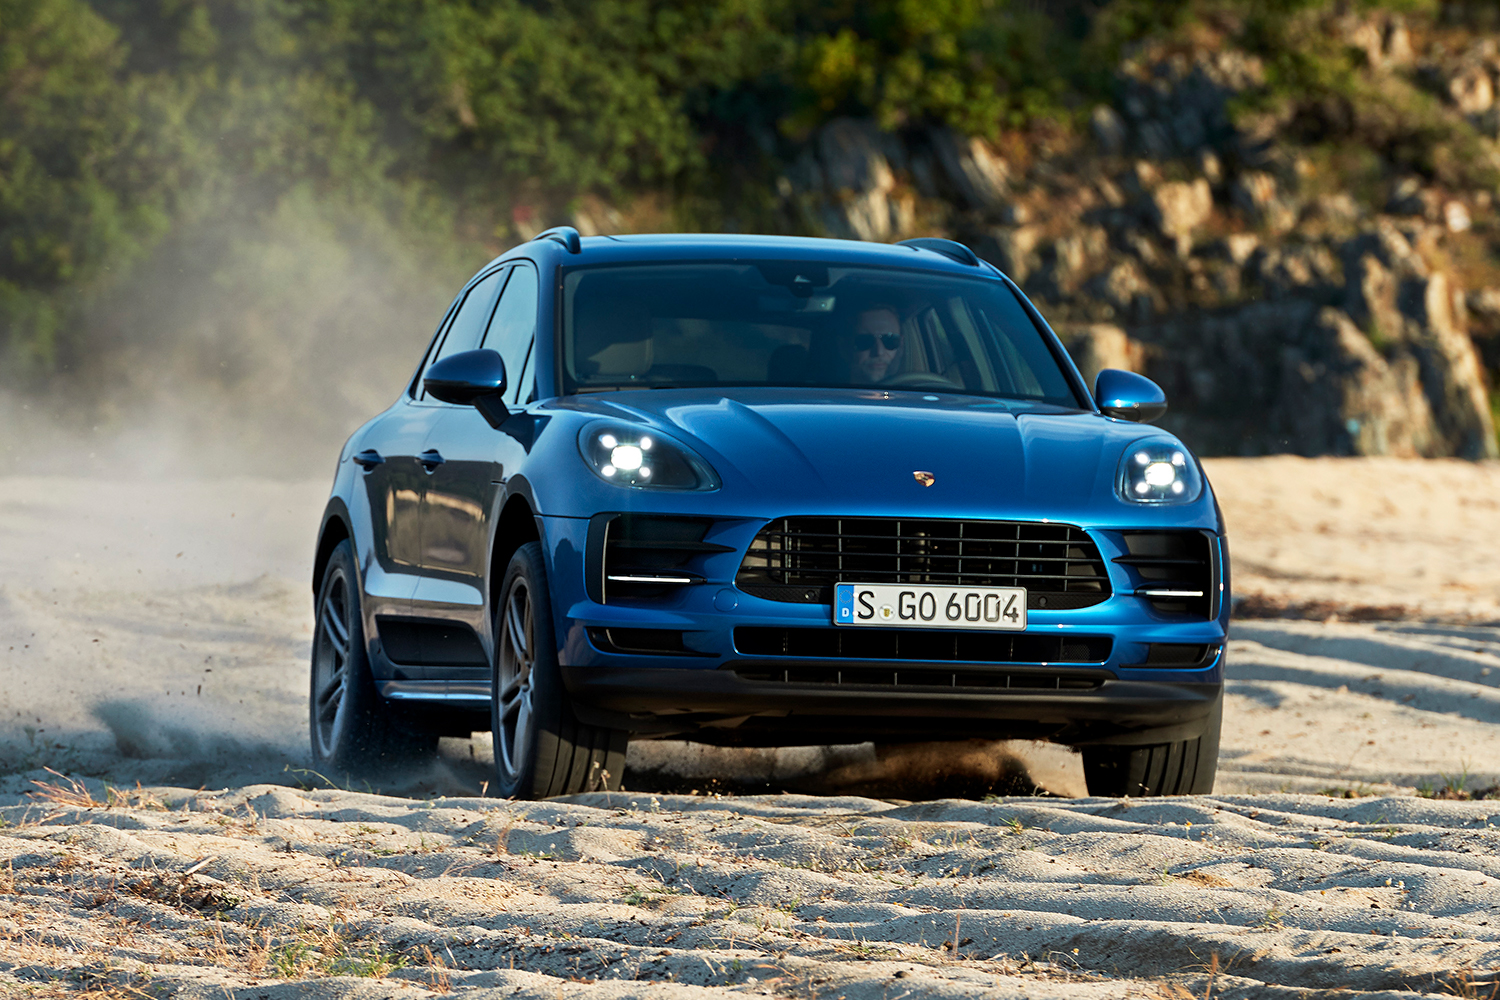 The new Porsche Macan SUV in blue driving on the sand